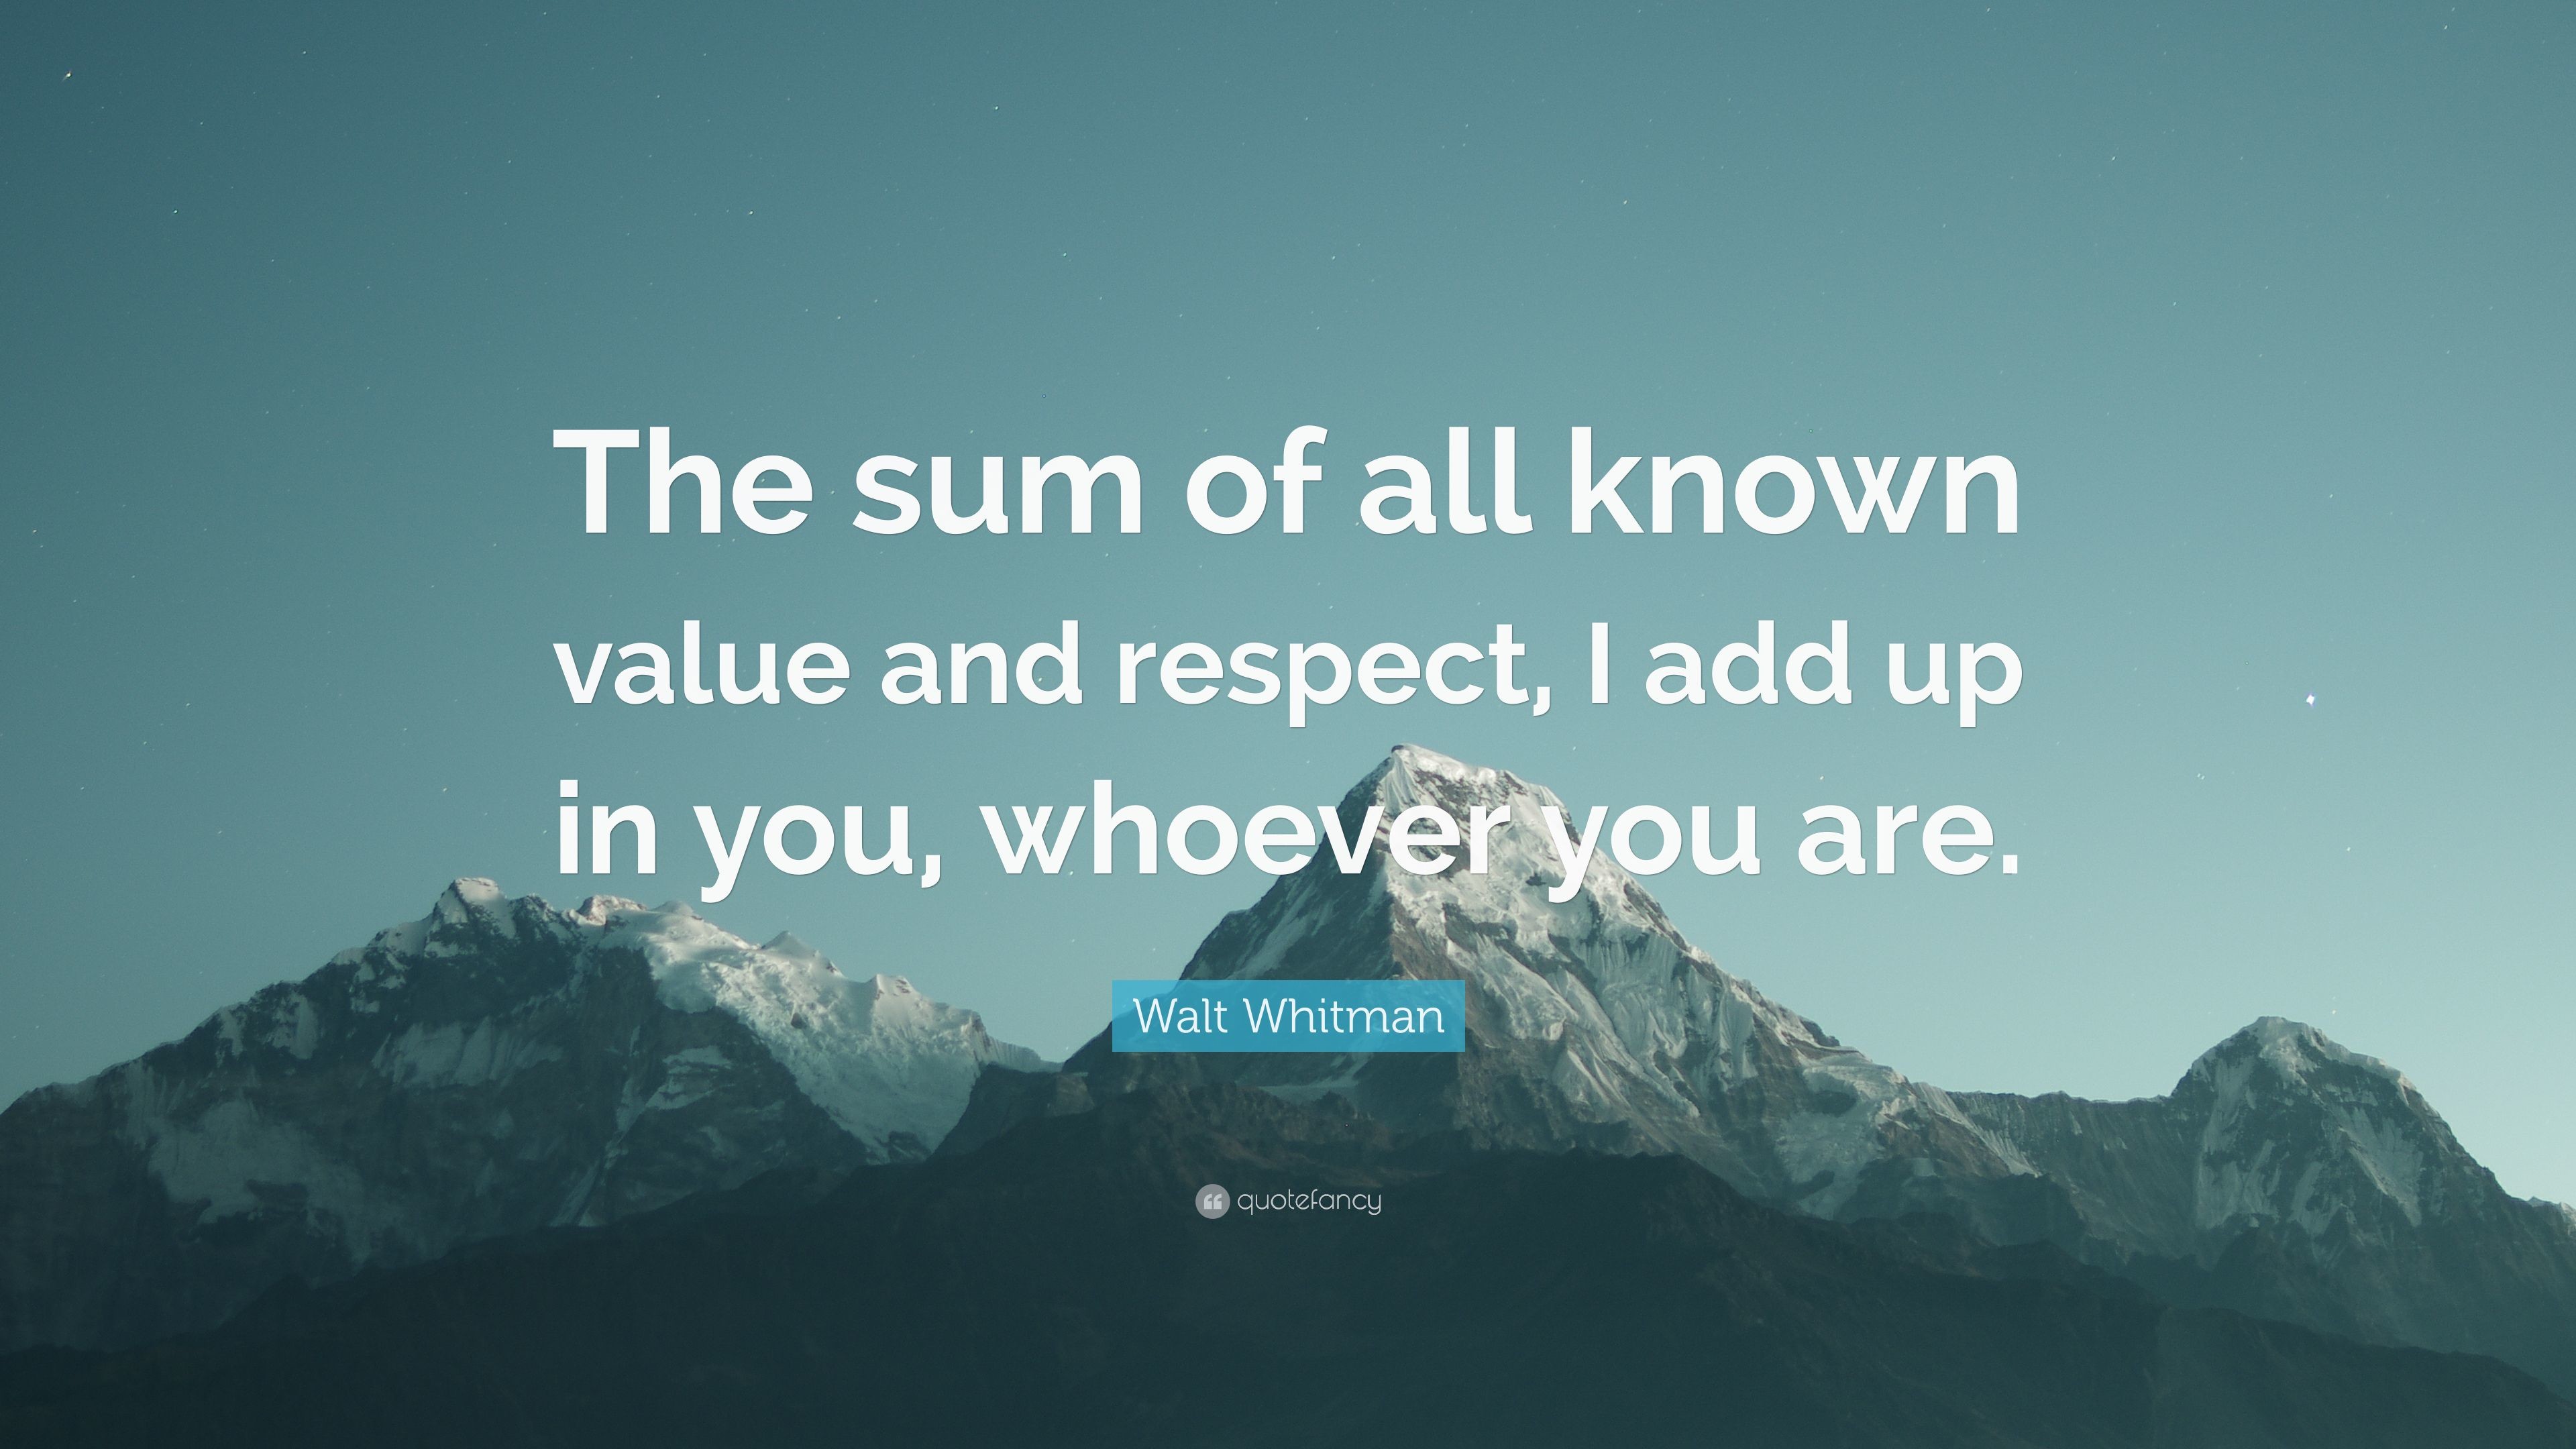 3840x2160 Walt Whitman Quote: “The sum of all known value and respect, I add